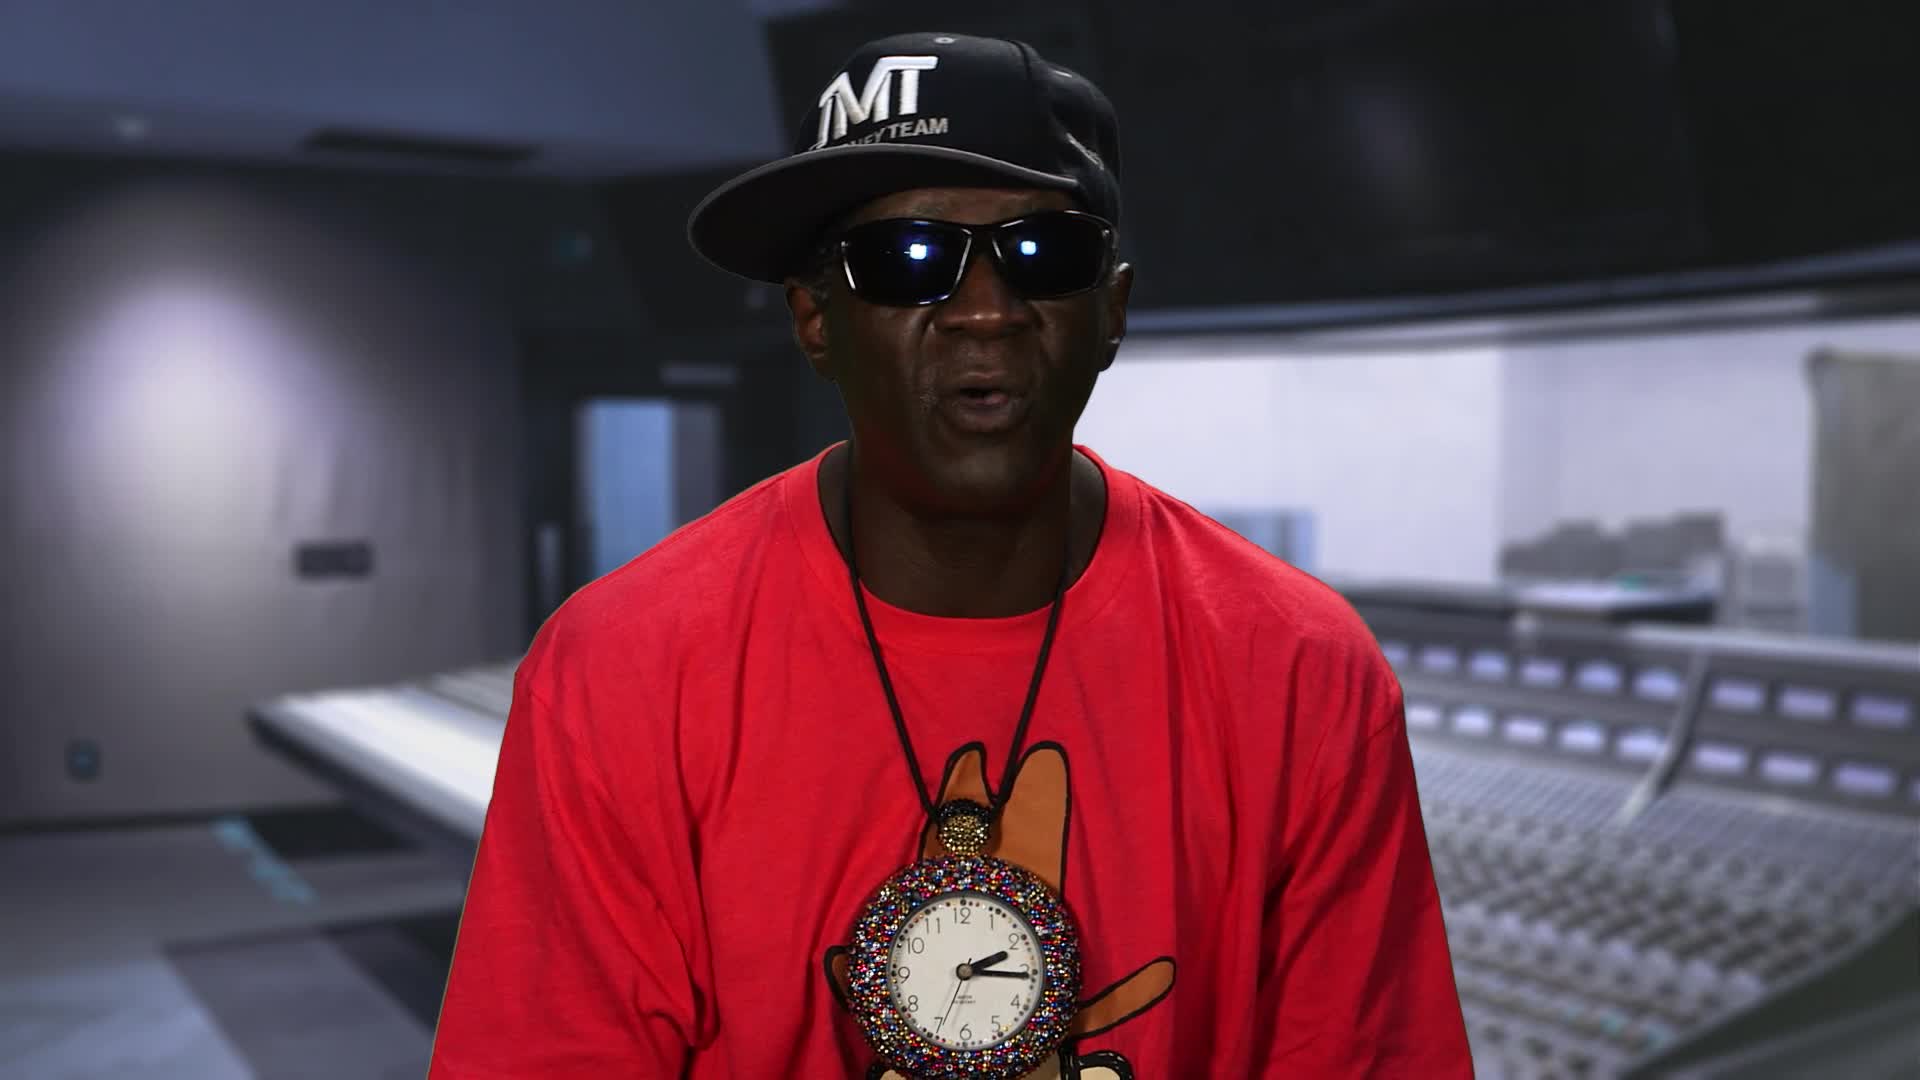 Catching up with Flavor Flav!